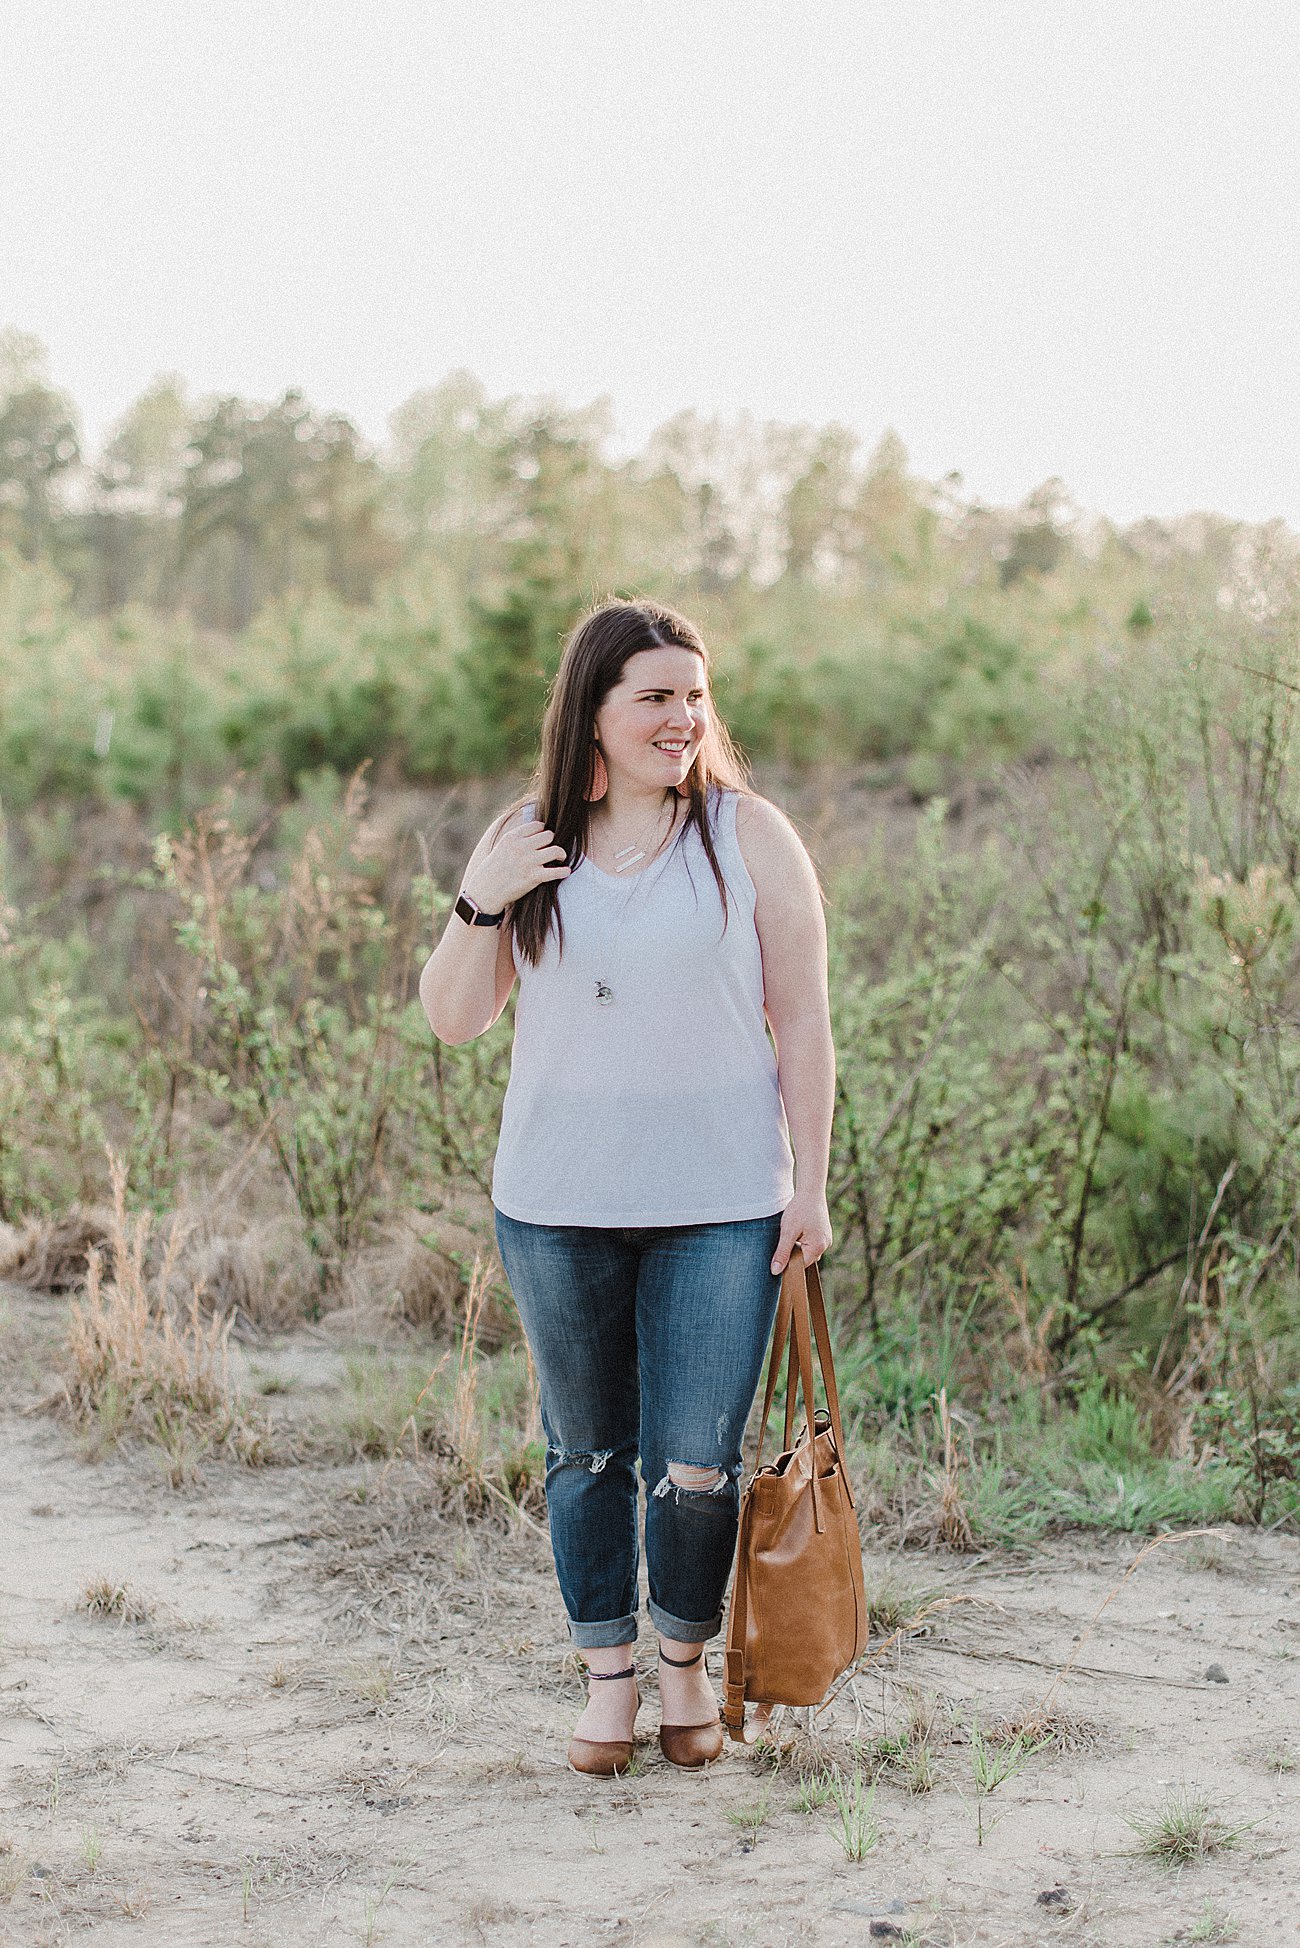 prAna Organic Cotton - Ethical and Fair Trade Fashion #GoOrganic #prAnaSpring18 (9) - prAna Organic Cotton Clothing styled by popular North Carolina ethical fashion blogger Still Being Molly